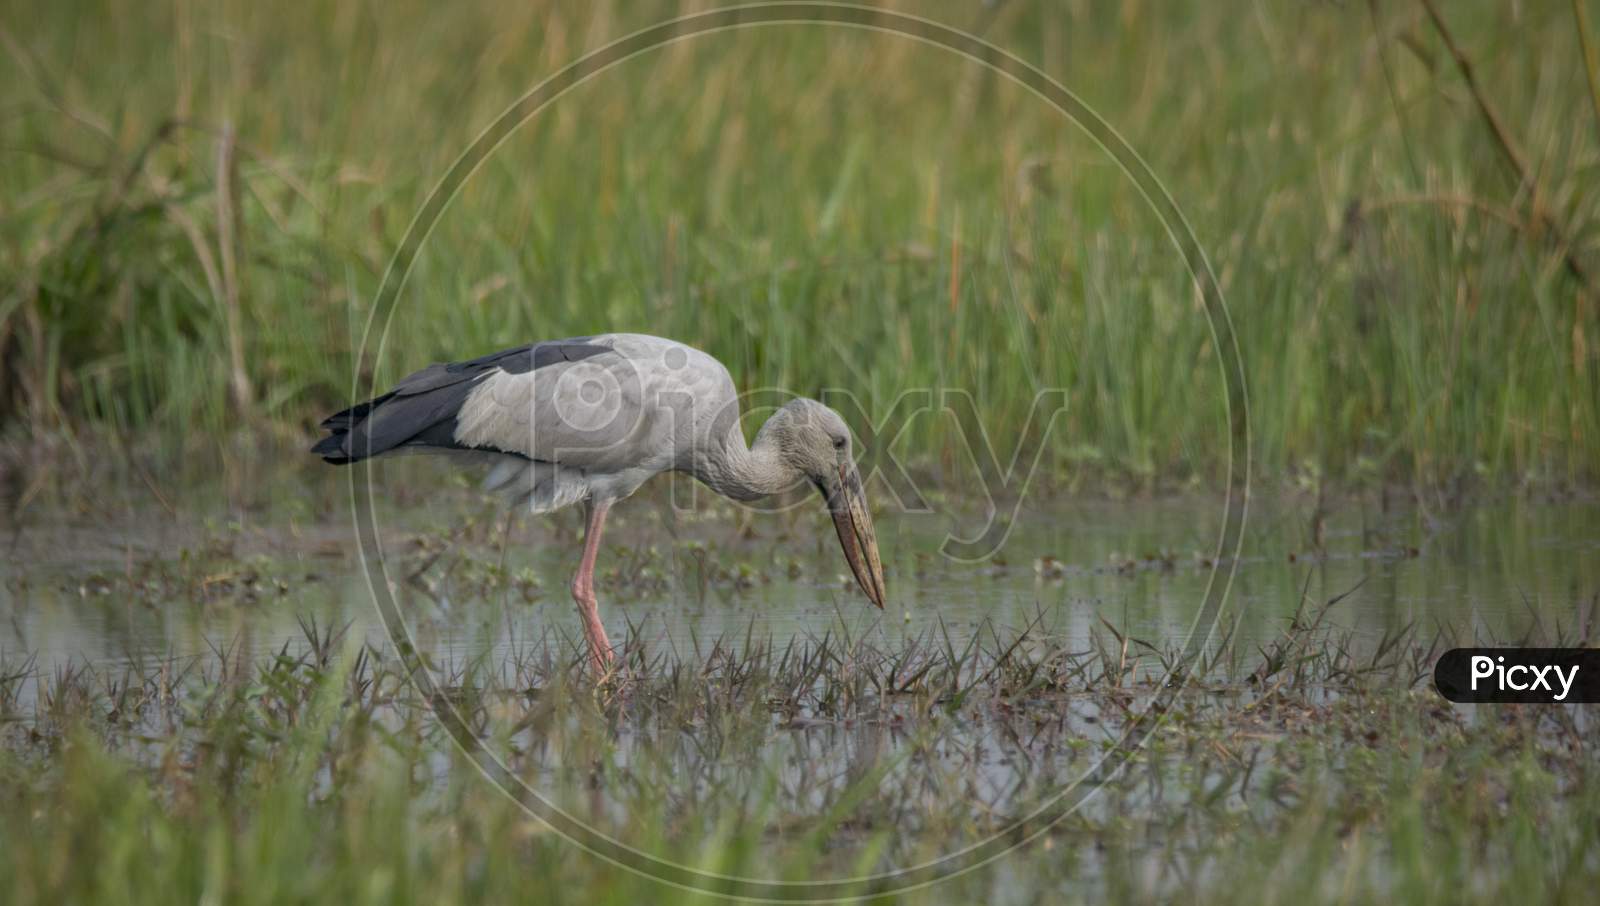 A Big Wild Bird Searching Food From Water At Wetland .